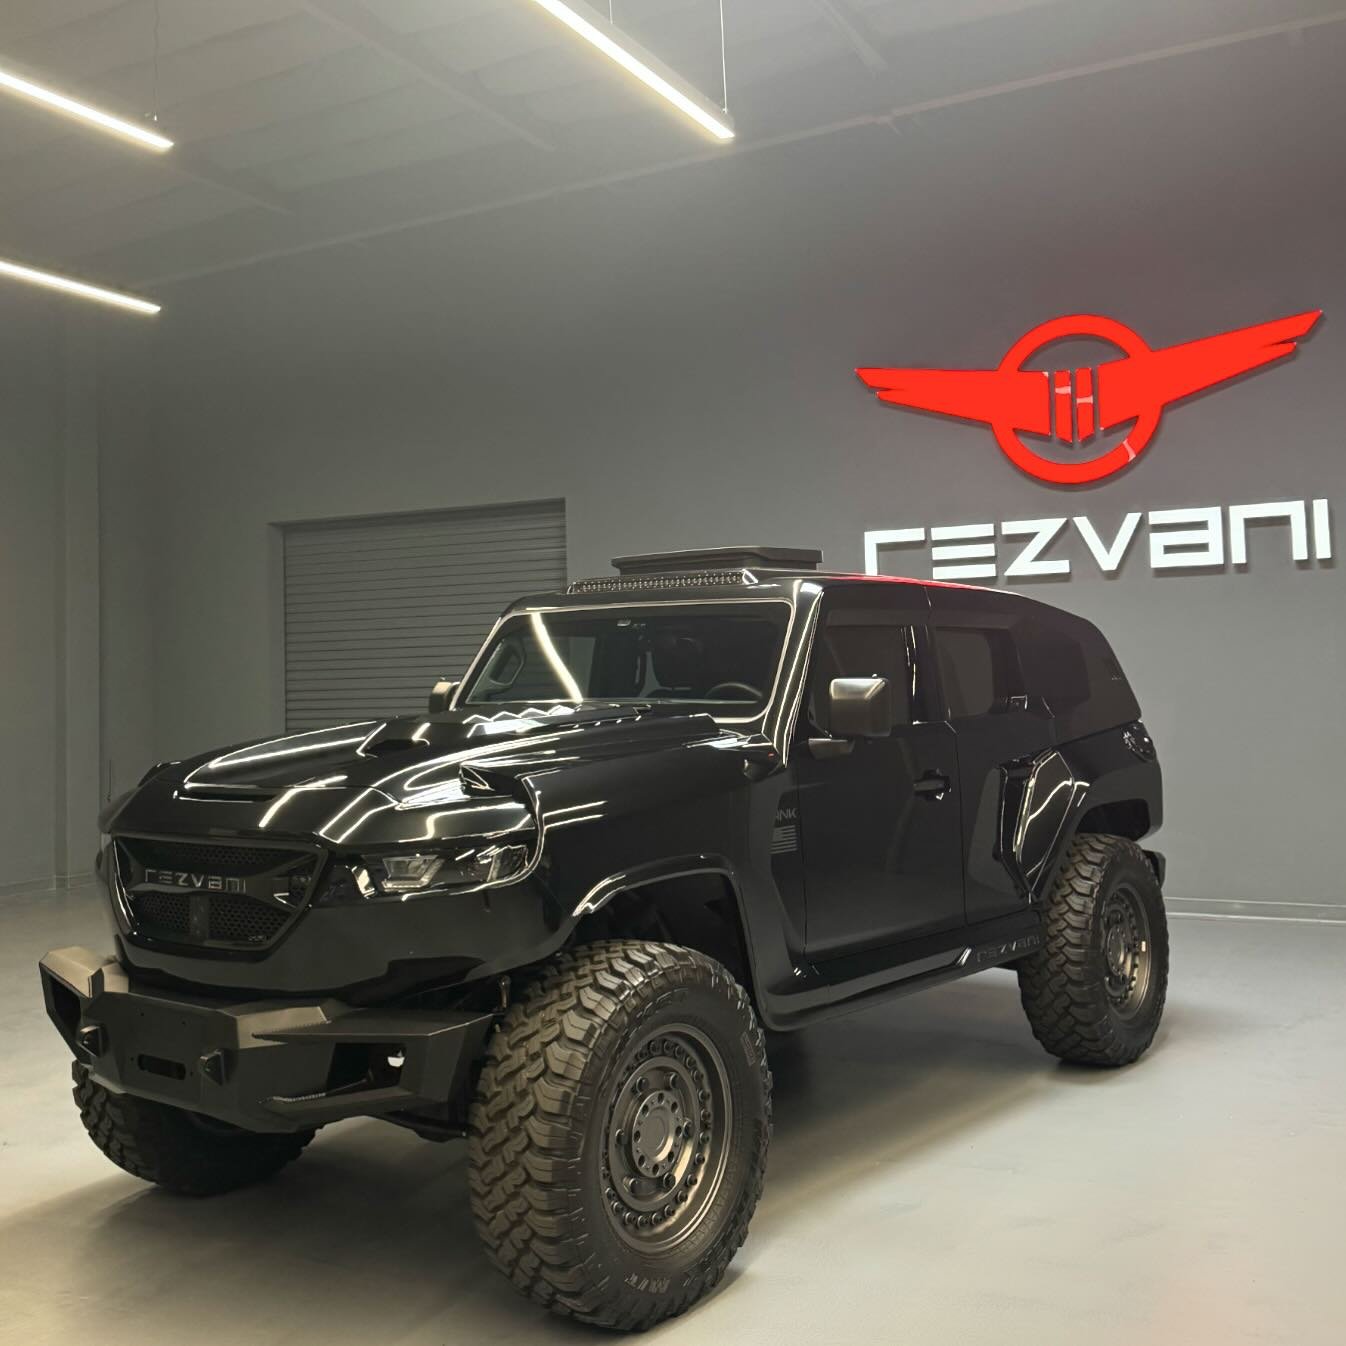 Black beauty.  TANK Military Edition with special option , escape hatch.  An escape hatch for use as an emergency exit, especially from a automobile, submarine, ship, or aircraft. #rezvanimotors #rezvanitank #escape #special #cars #carswithoutlimits 